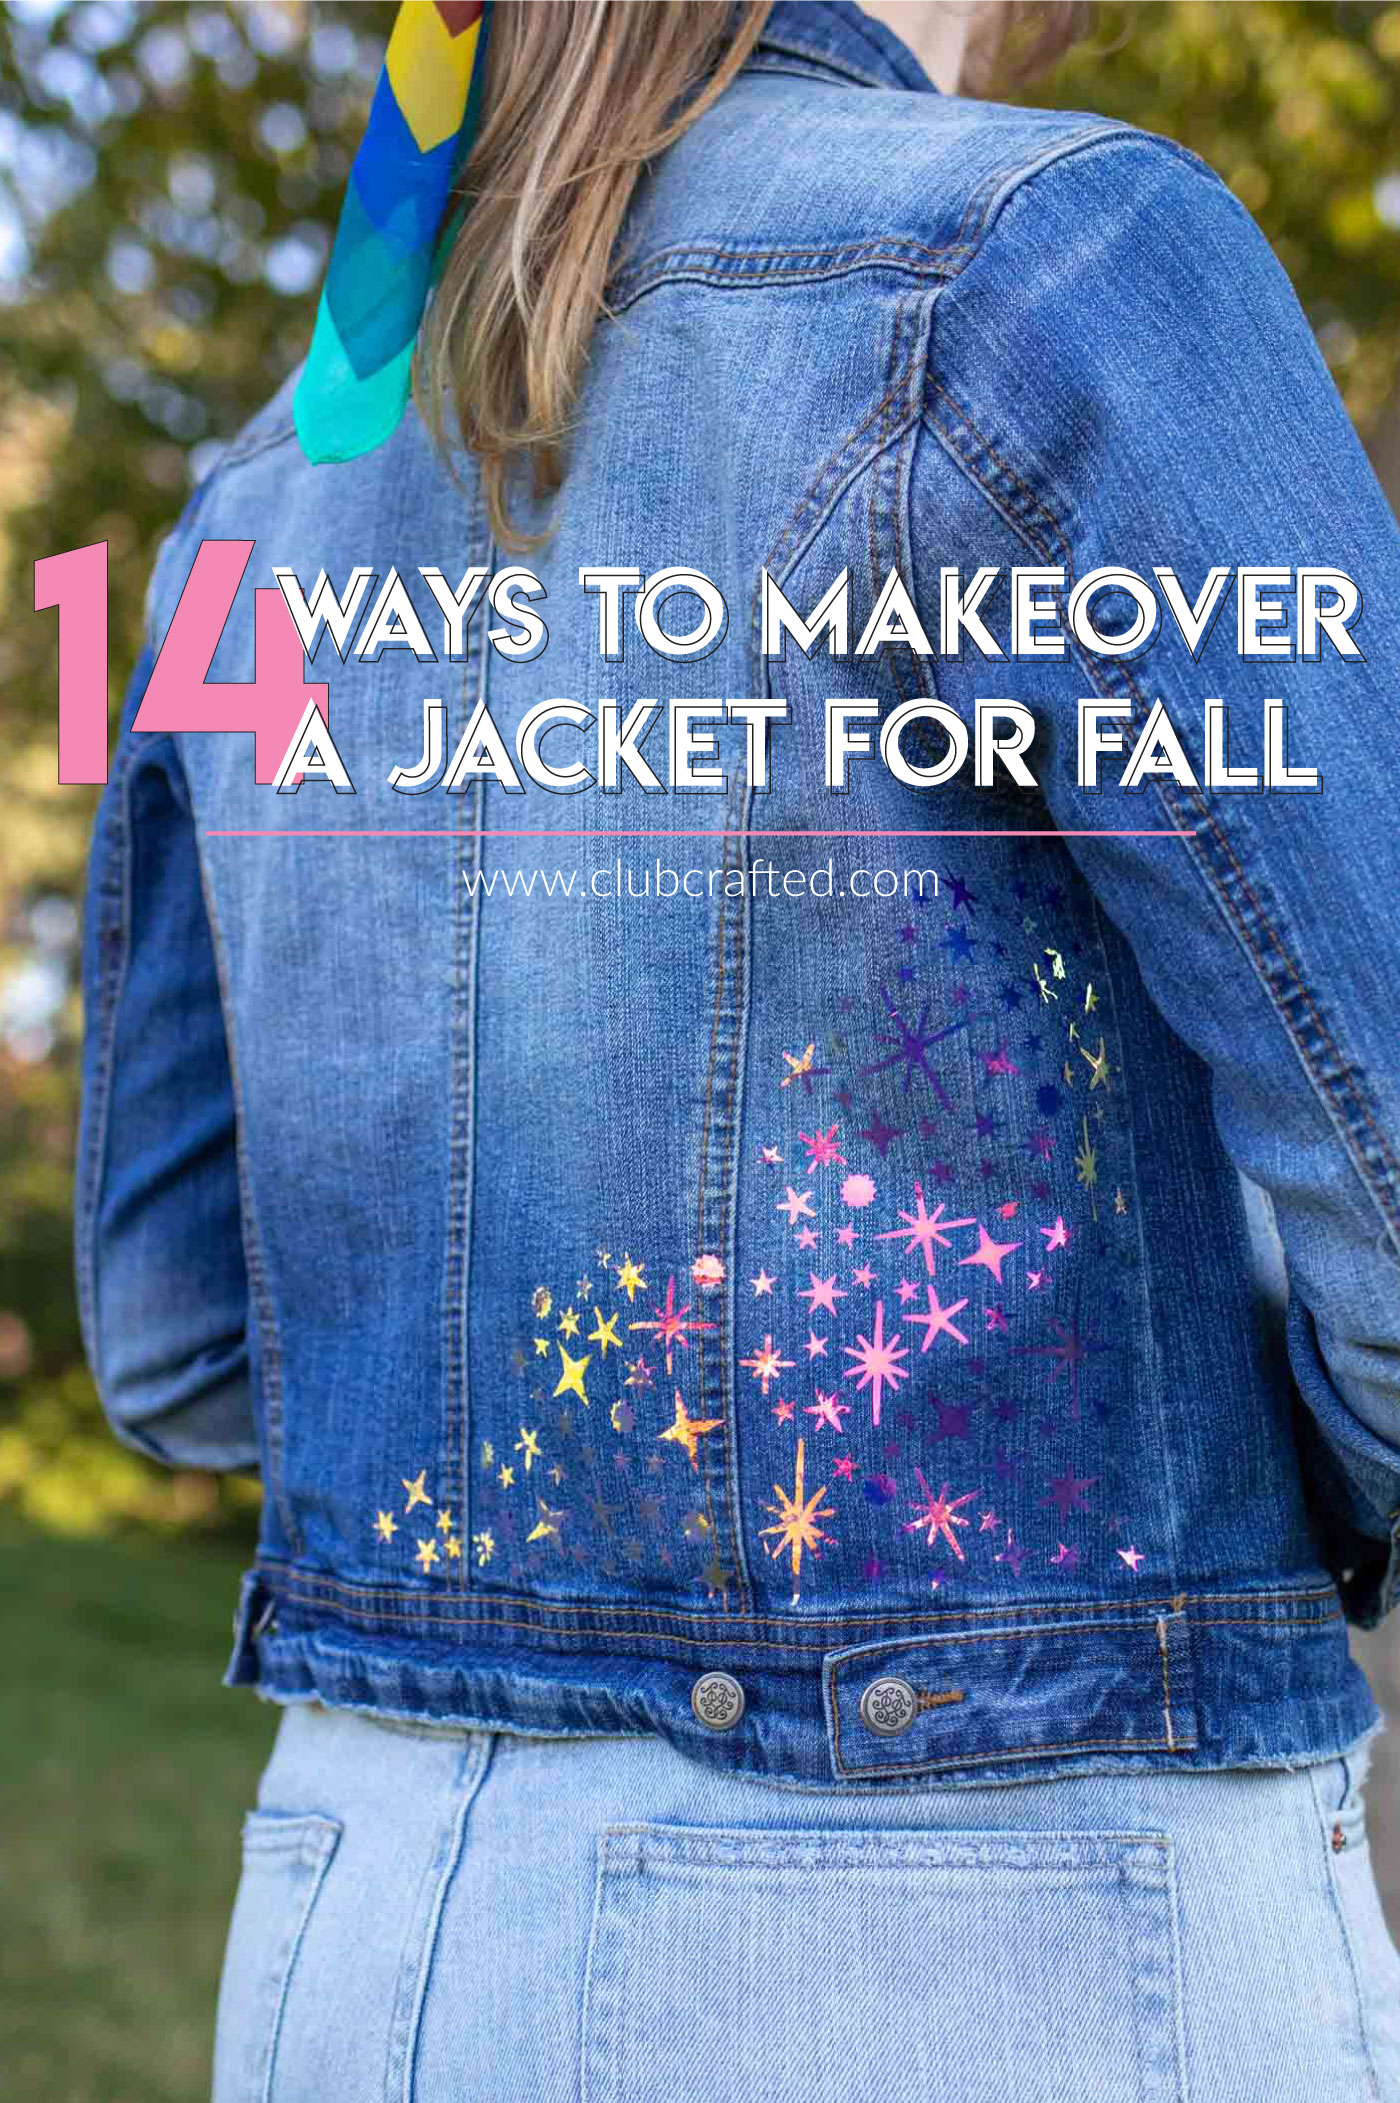 14 Ways to Makeover a Jacket for Fall // Find inspiration in these DIY jacket ideas for decorating a denim jacket for fall using supplies like vinyl, patches, paint, fabric and more! #fabric #nosew #womensclothing #diystyle #diyclothing #upcycle #fallstyle #fallclothing